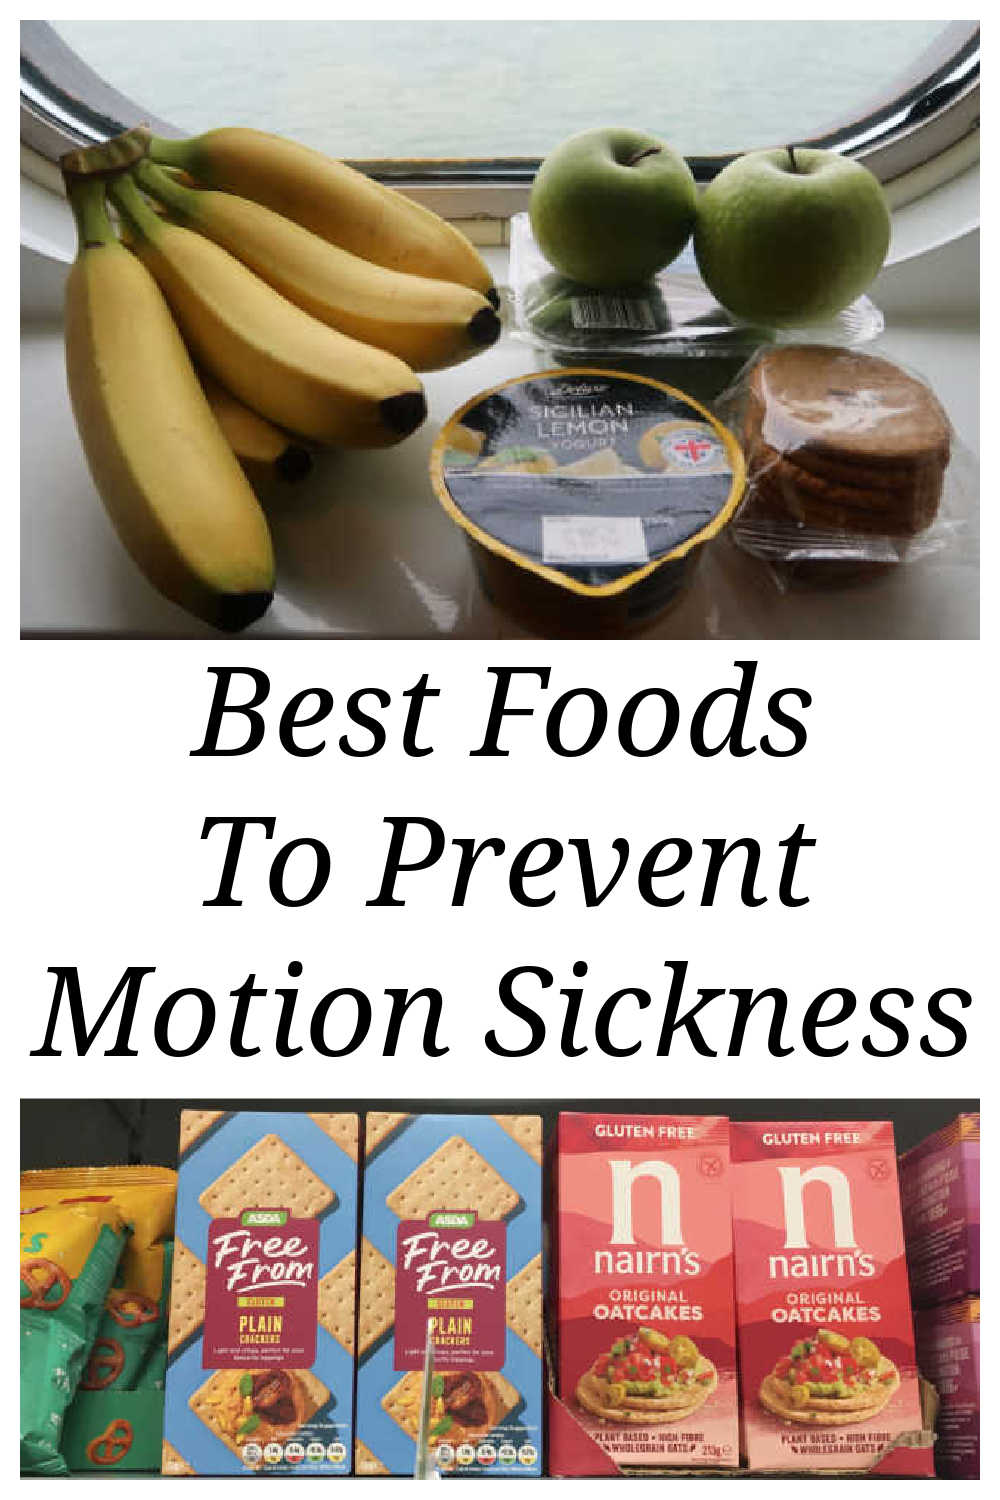 Foods To Prevent Motion Sickness - Best Travel Help Tips - remedies to eat to avoid sickness during car, bus, plane, boat trips or amusement park rides.